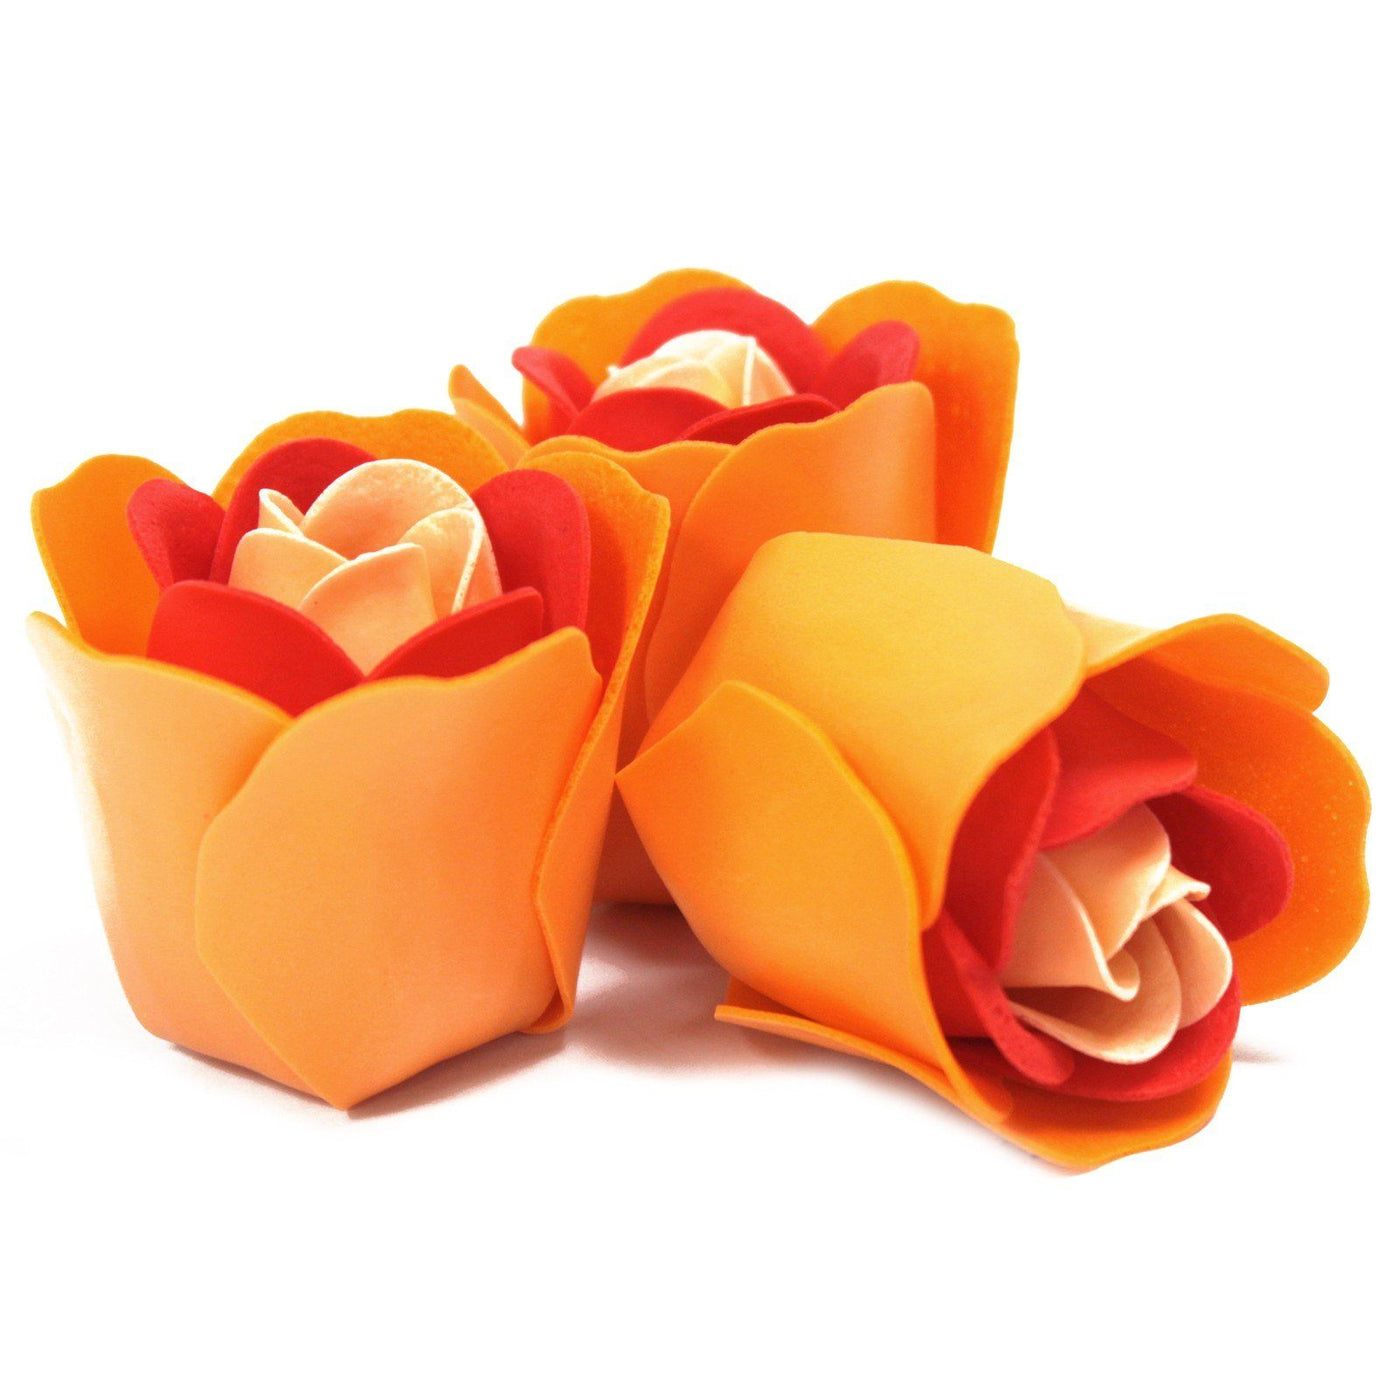 Set of 3 Luxury Soap Bath Flowers Heart Gift Box - Peach Roses.  A wonderful range of Luxury Soap Flowers. They are a perfect addition for a relaxing romantic bath, or you can even use individual petals as guest soaps. Beautifully packed these Soap Flowers are a perfect gift, wedding favours, Christmas stocking filler or just a little treat for yourself. 